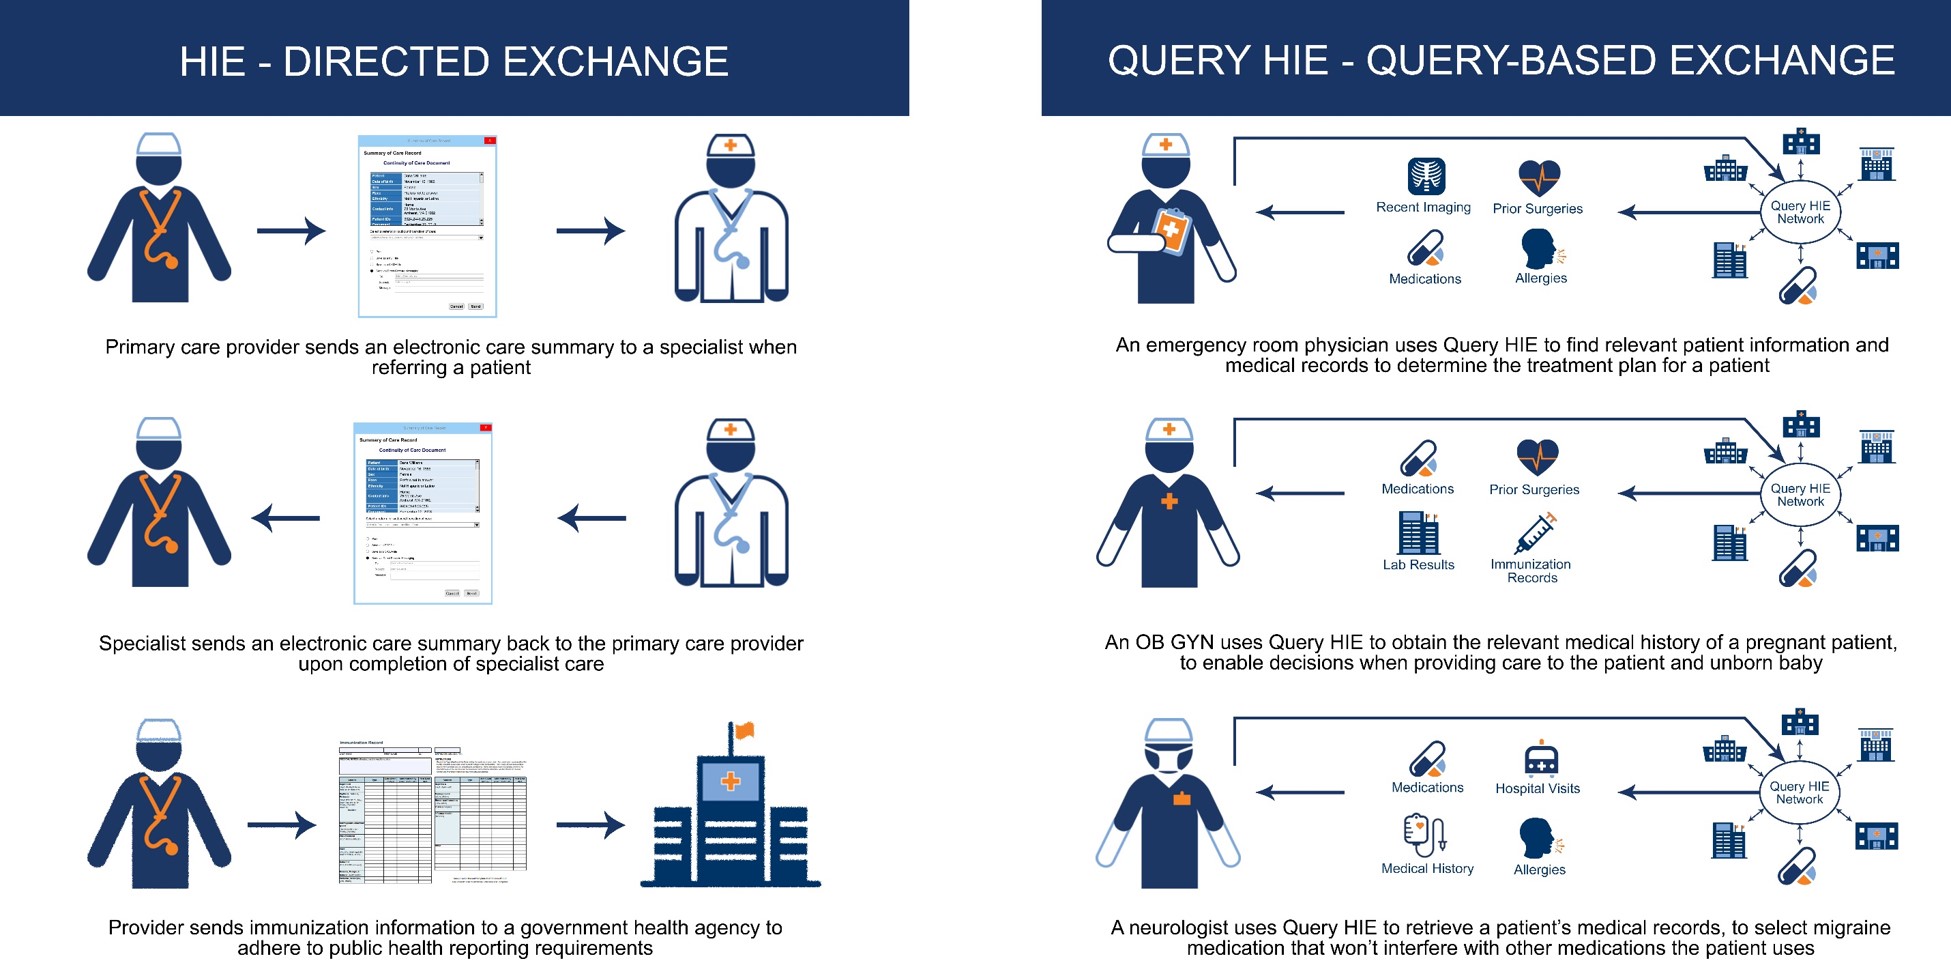 Table that compares the Directed Exchange and Query HIE methods